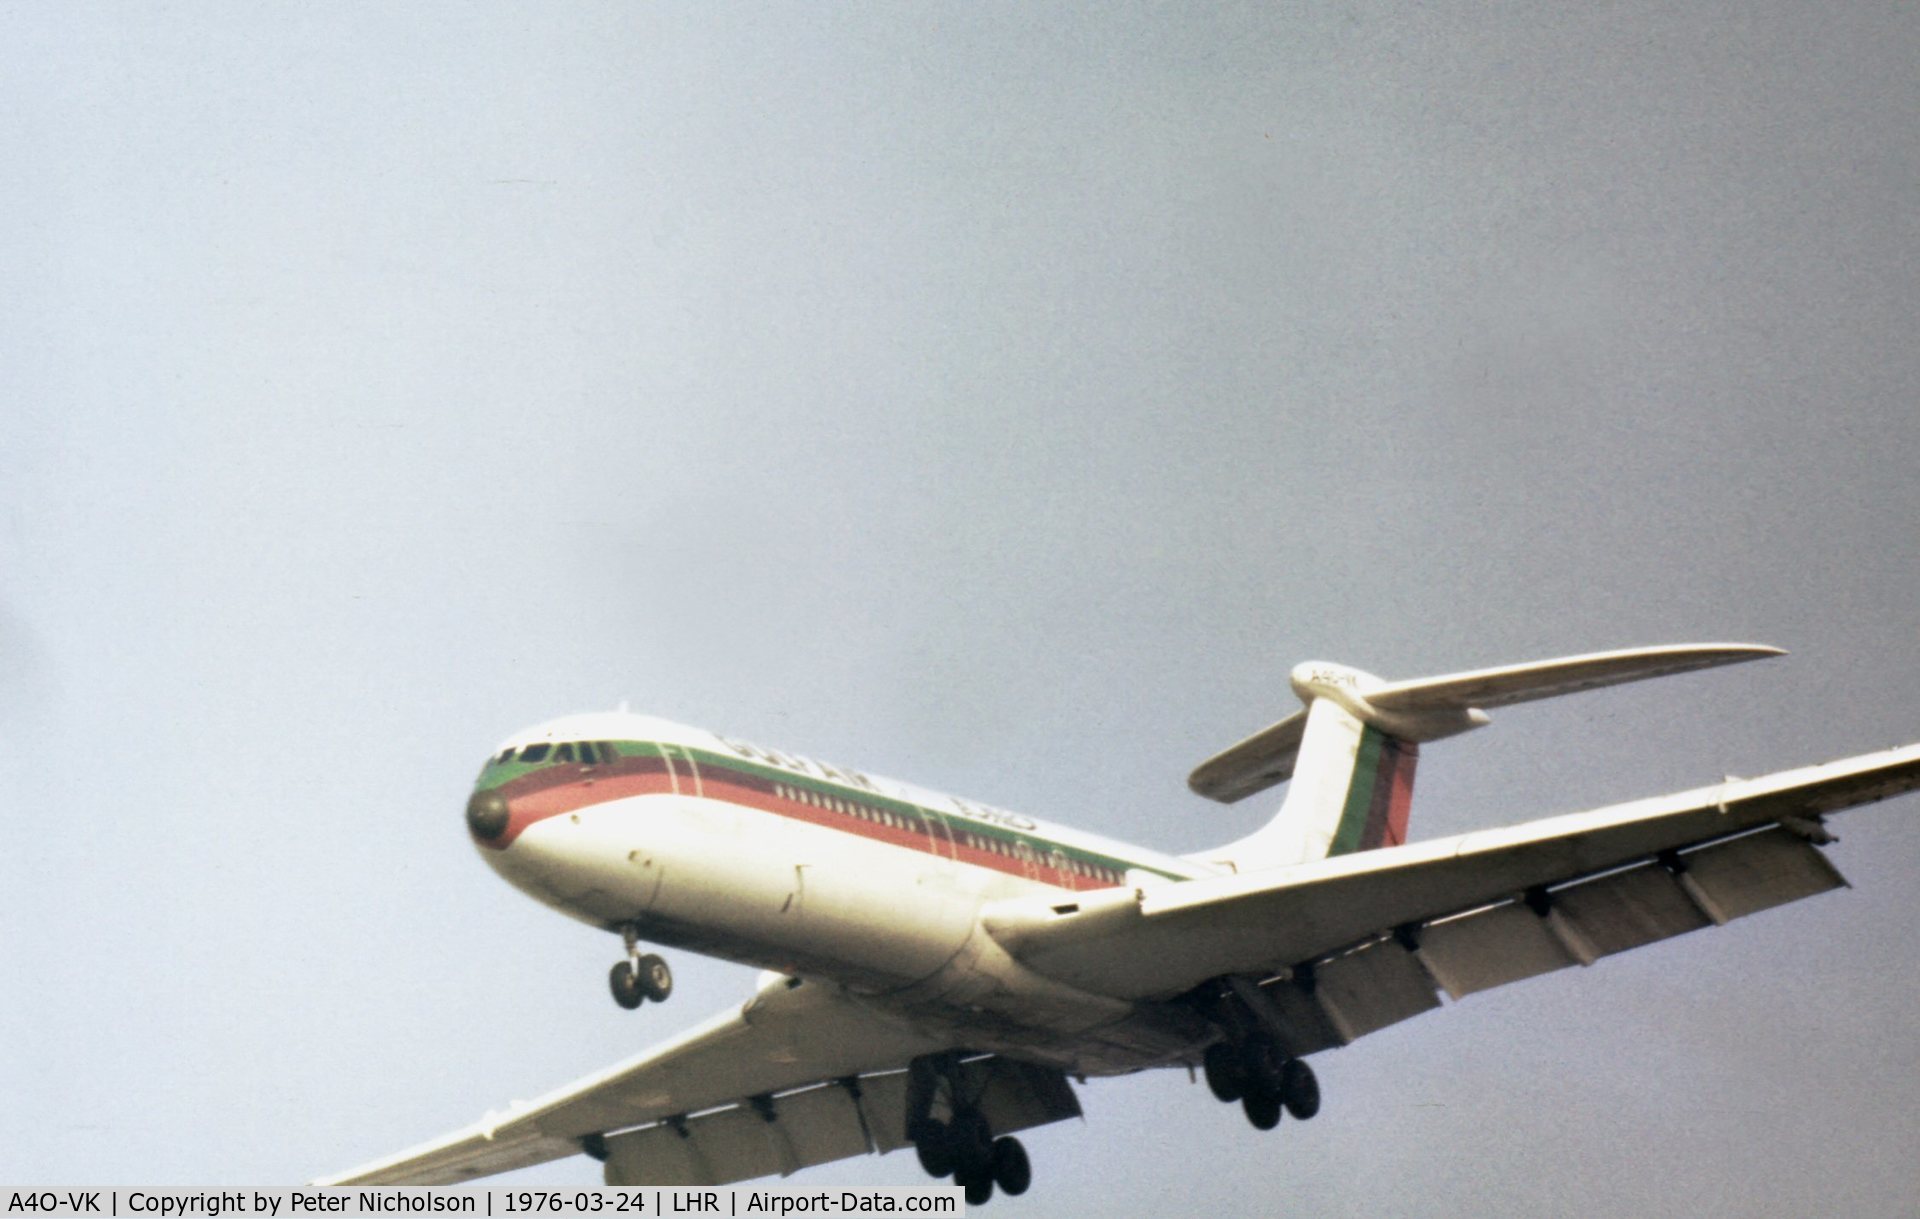 A4O-VK, 1964 Vickers VC10 Srs 1101 C/N 813, VC.10 of Gulf Air on final approach to London Heathrow in the Spring of 1976.